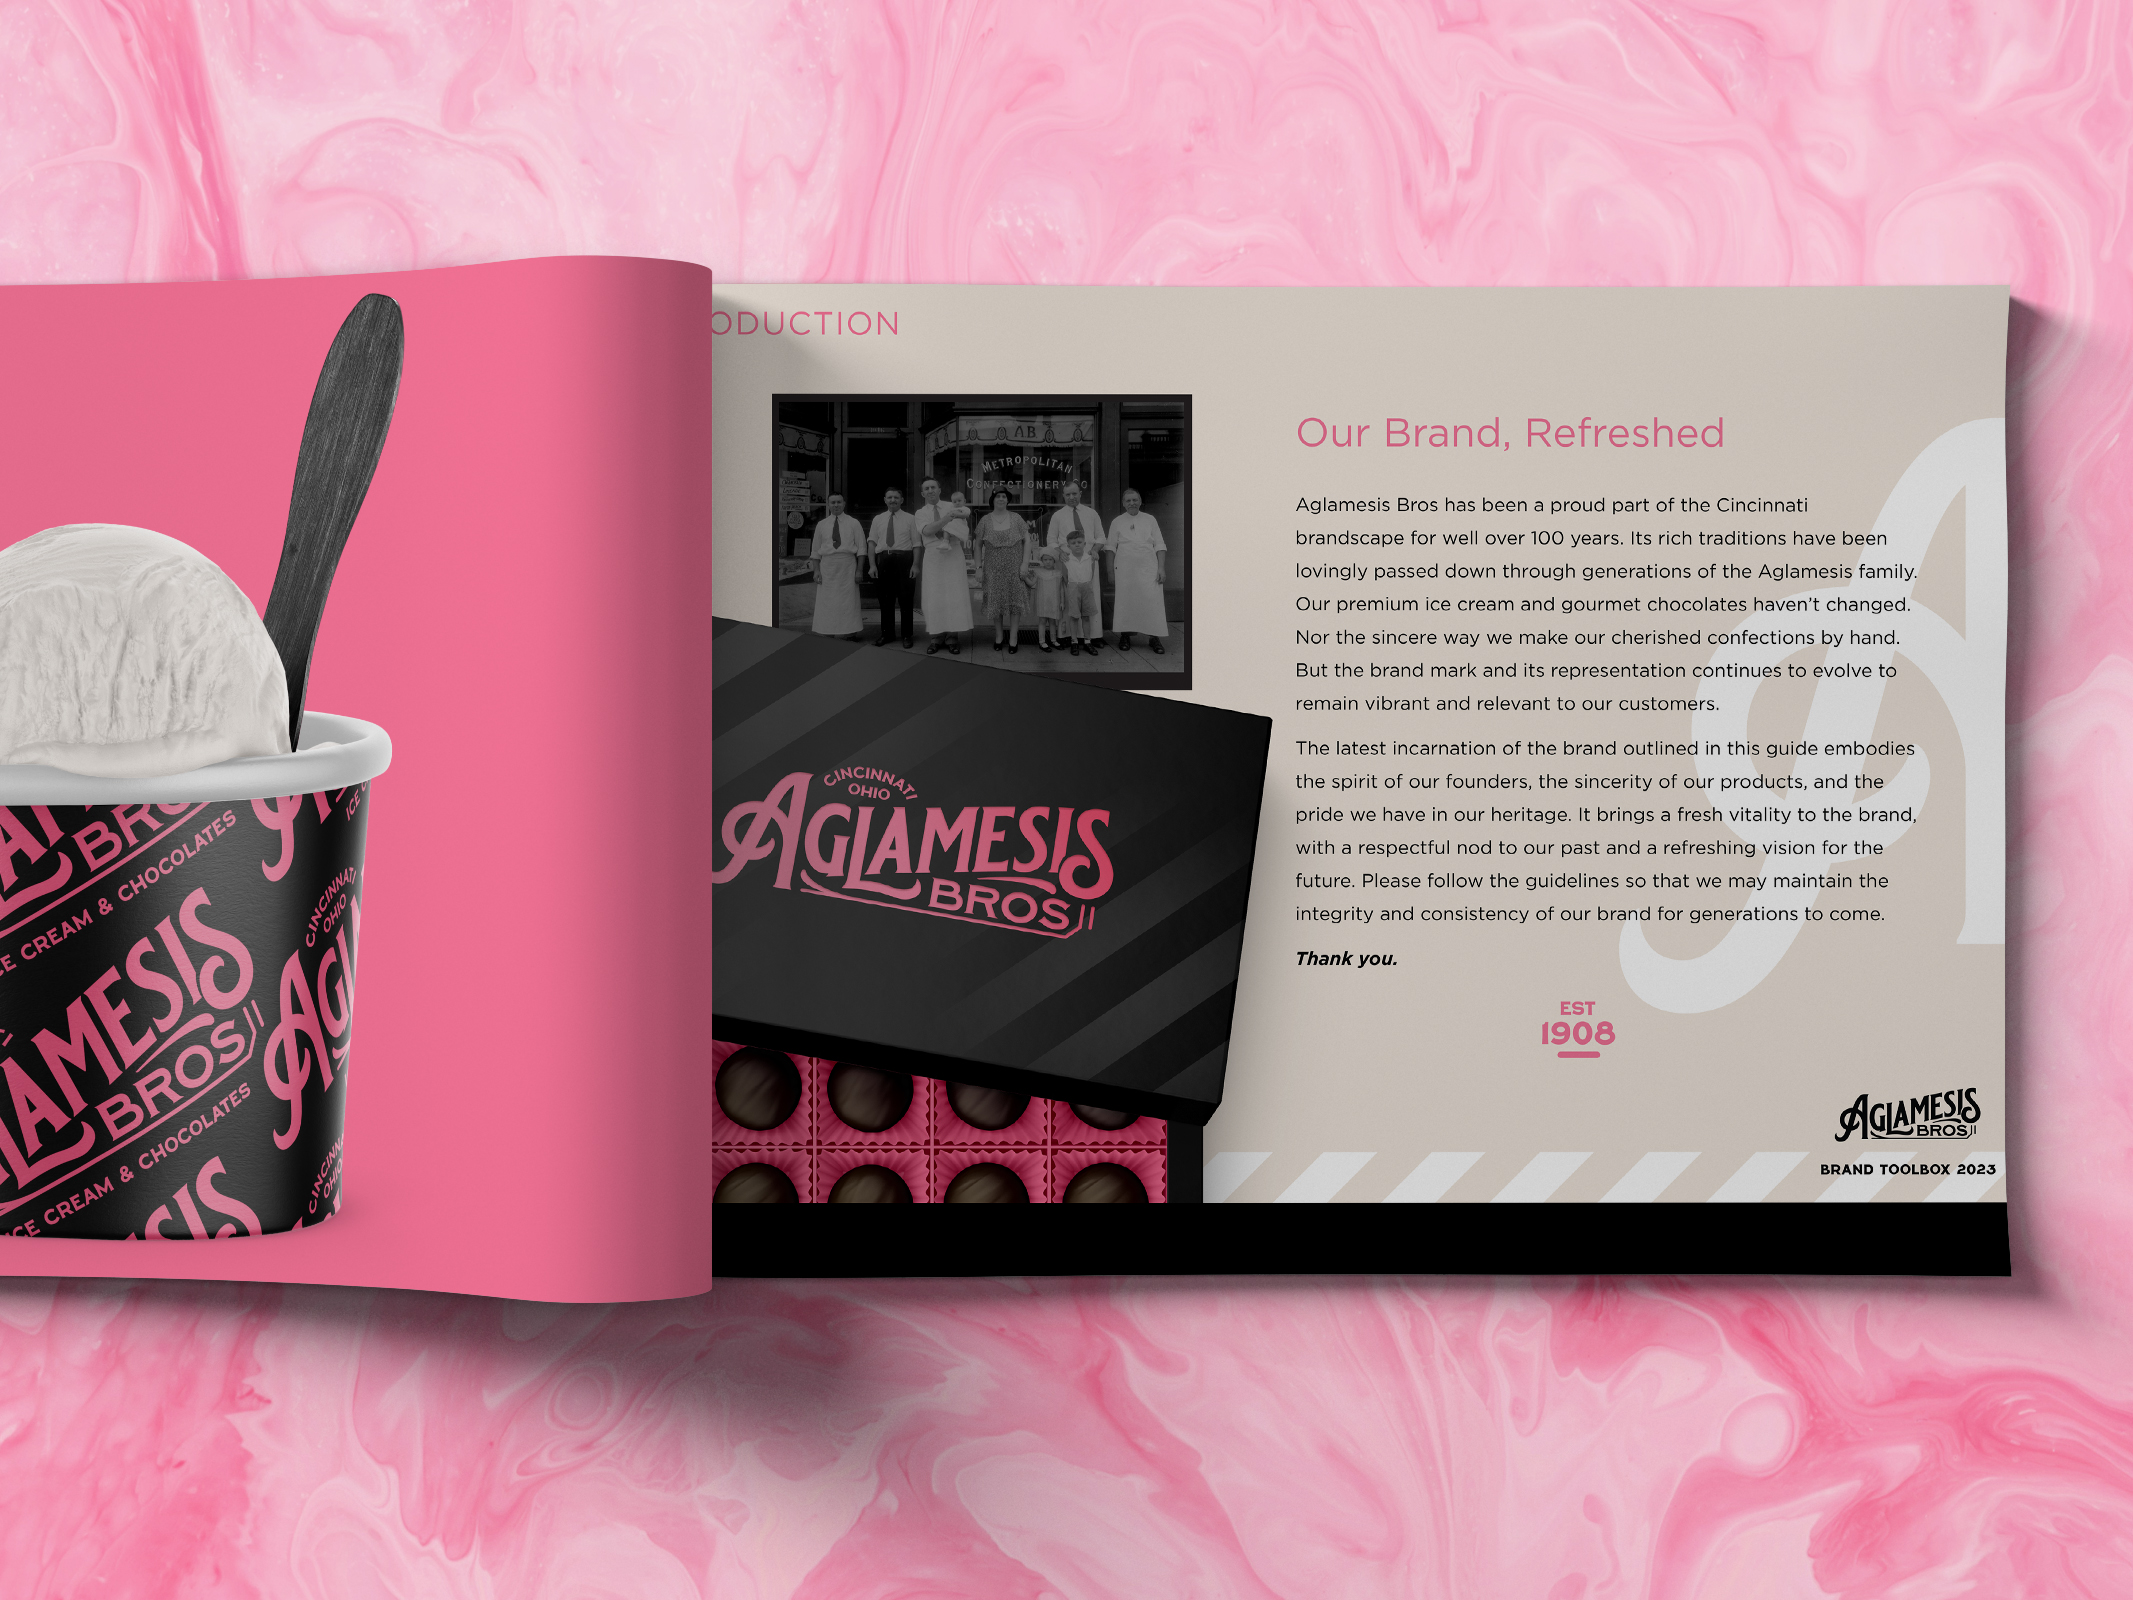 Revamping Brand Identity: Neltner Small Batch Redesigns Packaging for Aglamesis Bros Ice Cream Parlor